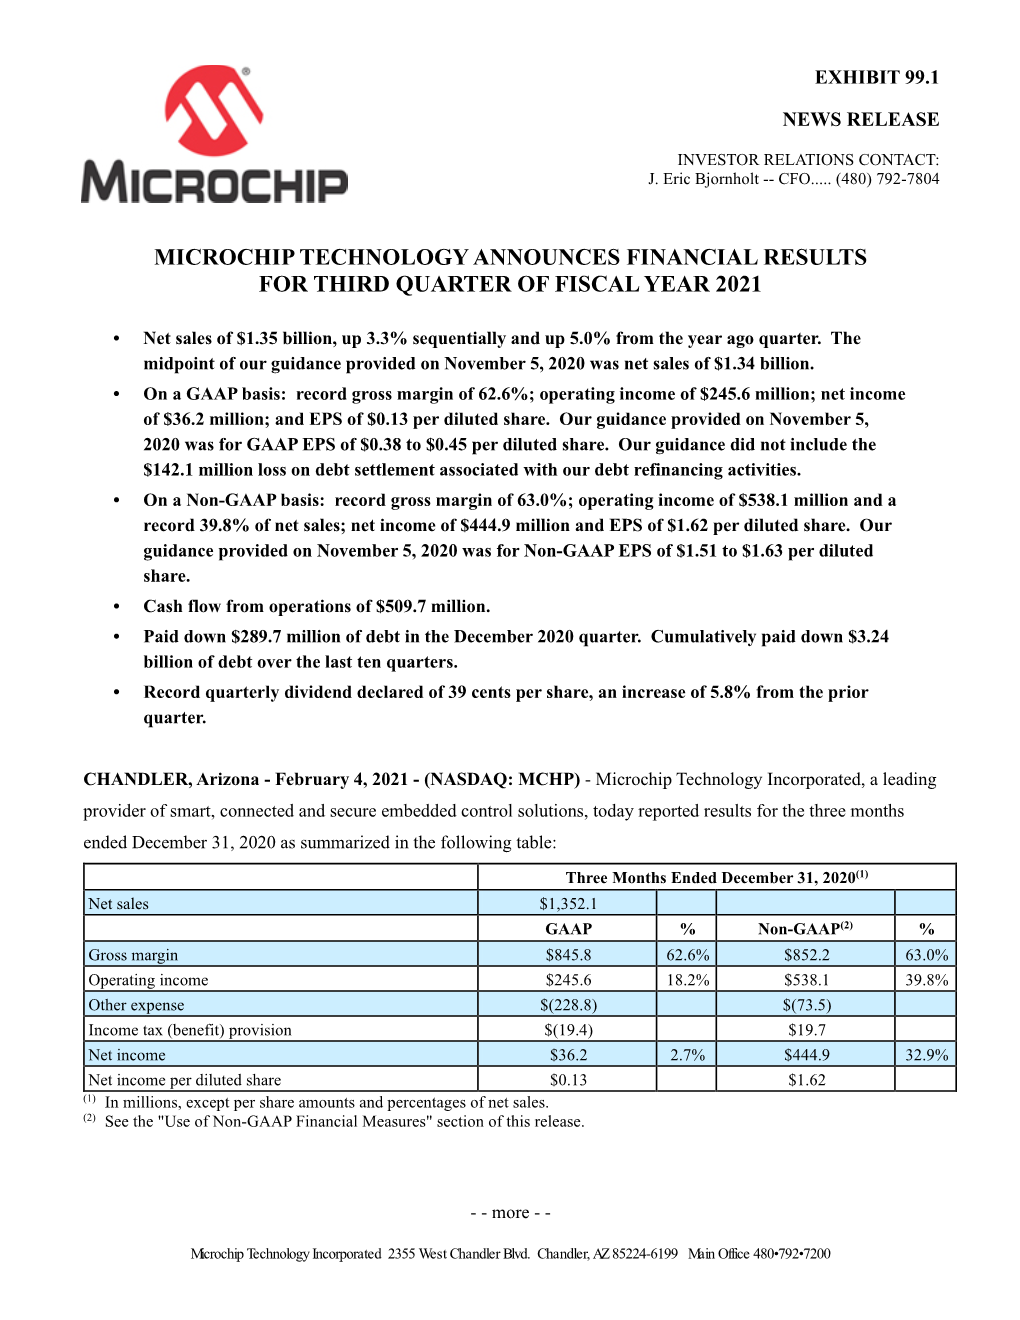 Microchip Technology Announces Financial Results for Third Quarter of Fiscal Year 2021